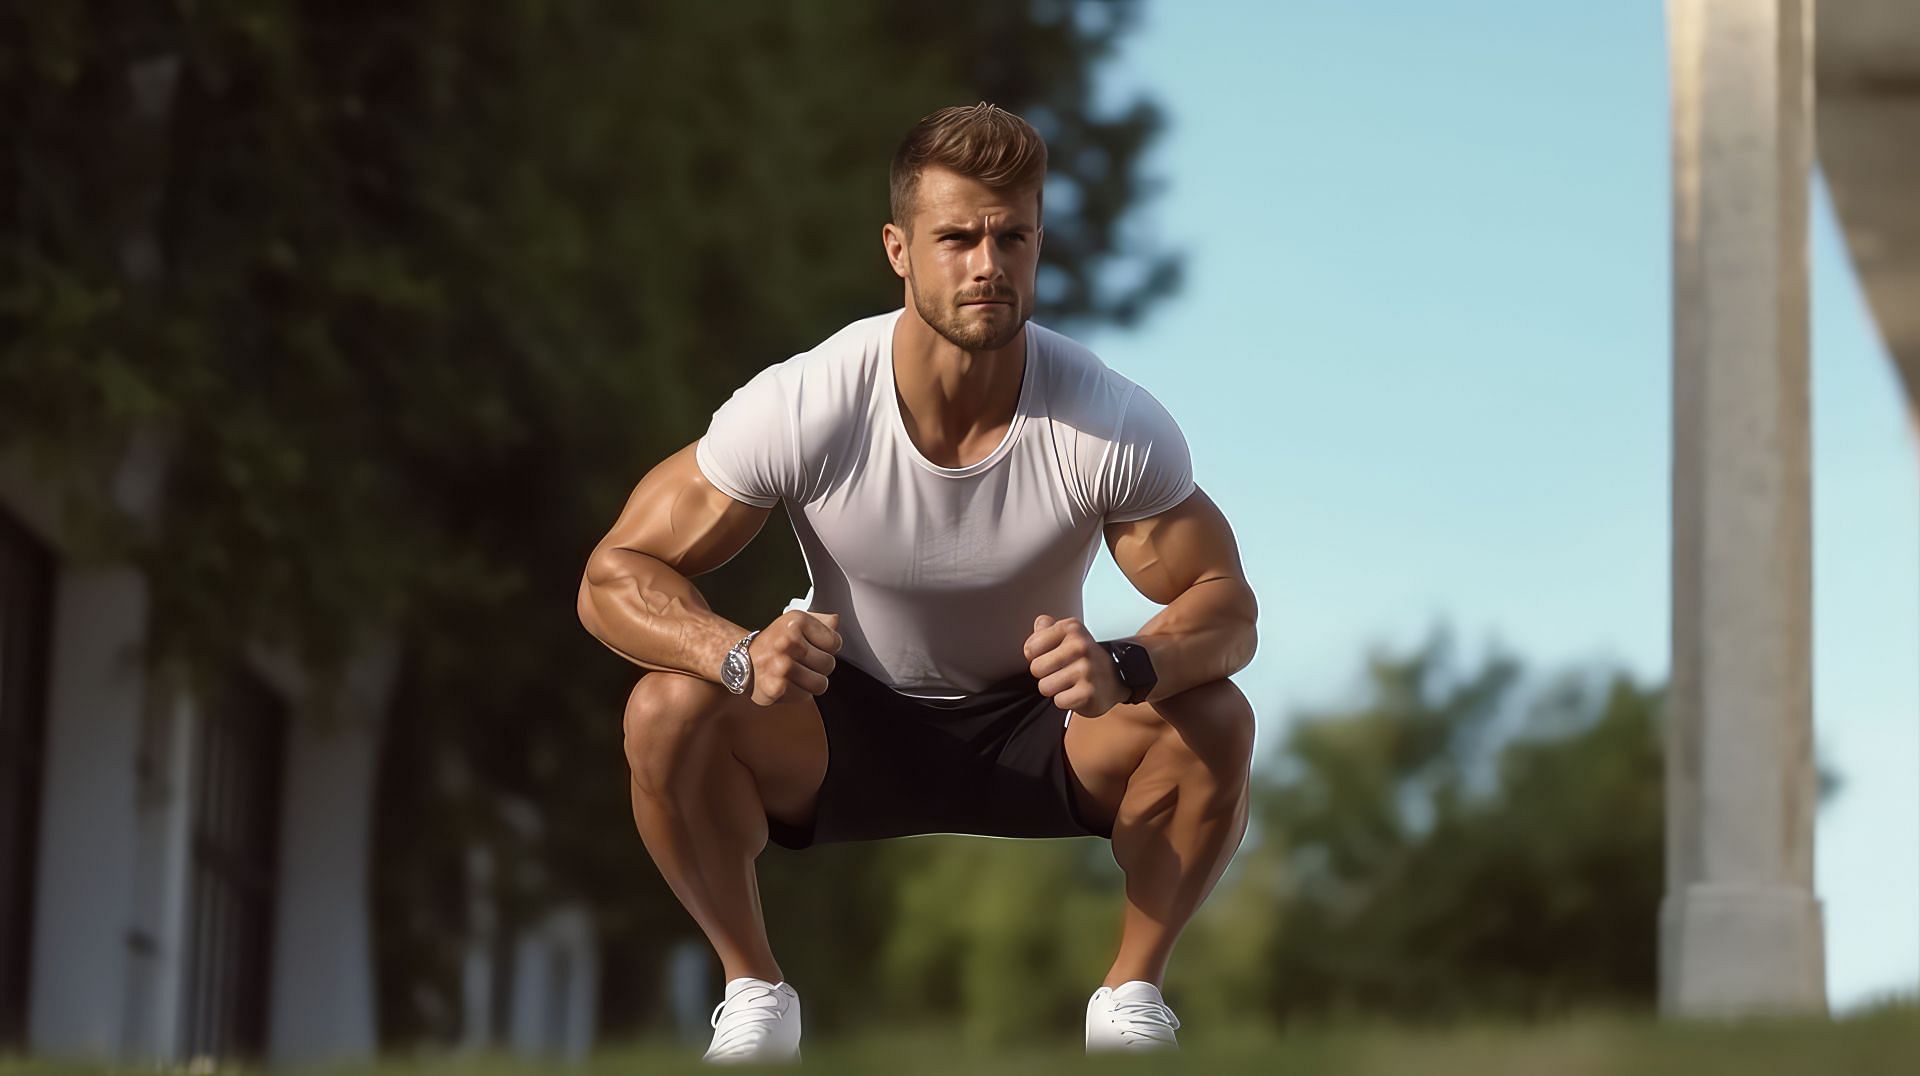 Butt Exercises - Start slow and then increase your reps (Image via Vecteezy)